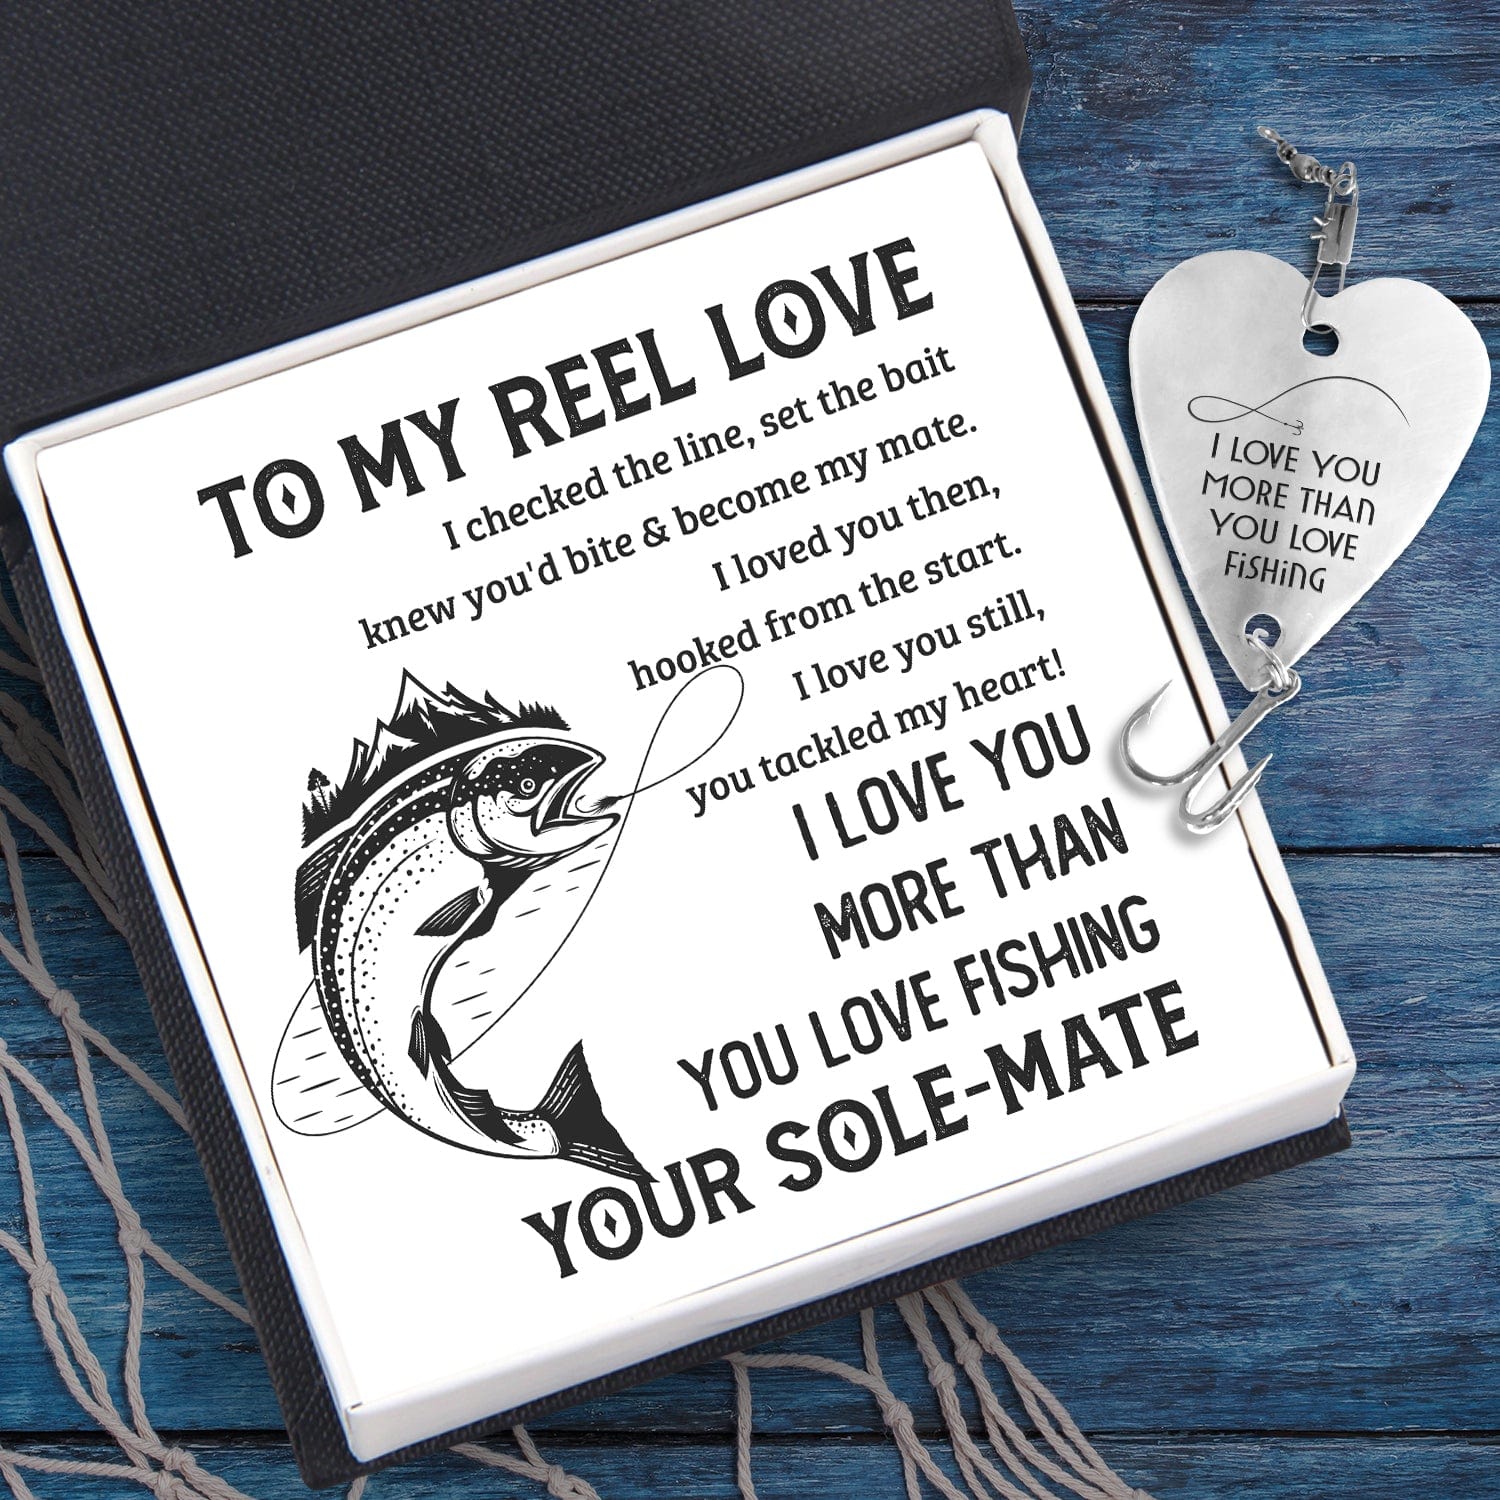 Heart Fishing Lure - Fishing - To My Reel Love - I Love You More